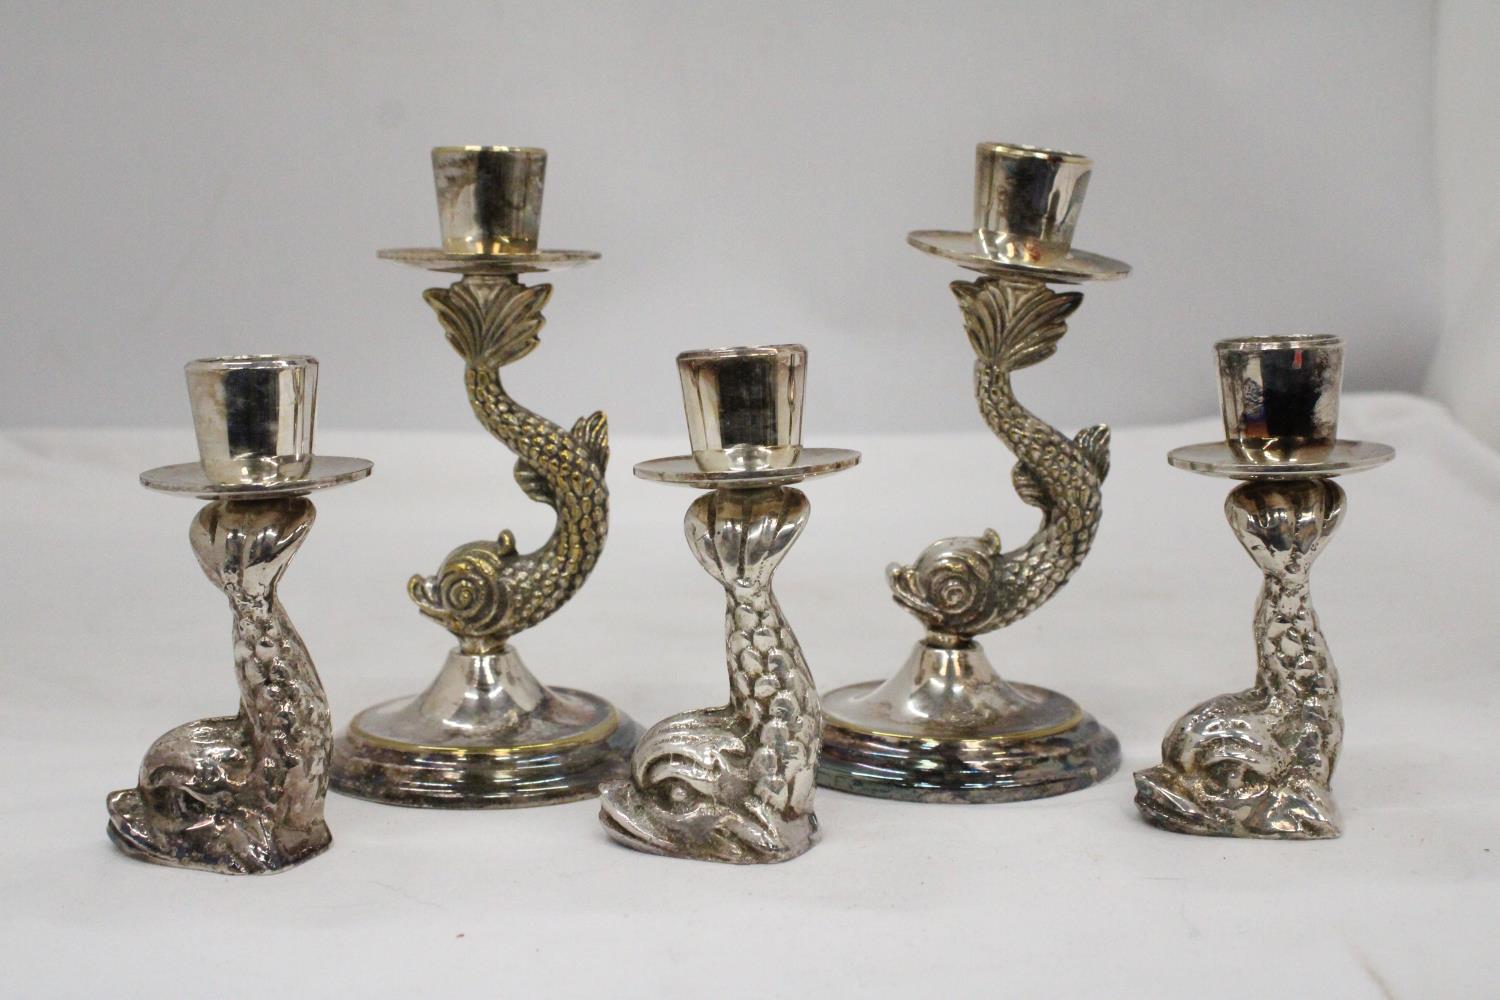 TWO VINTAGE ORNATE SILVER PLATED KOI CARP CANDLE HOLDERS PLUS THREE FURTHER KOI FISH CANDLE STICKS - Image 5 of 7